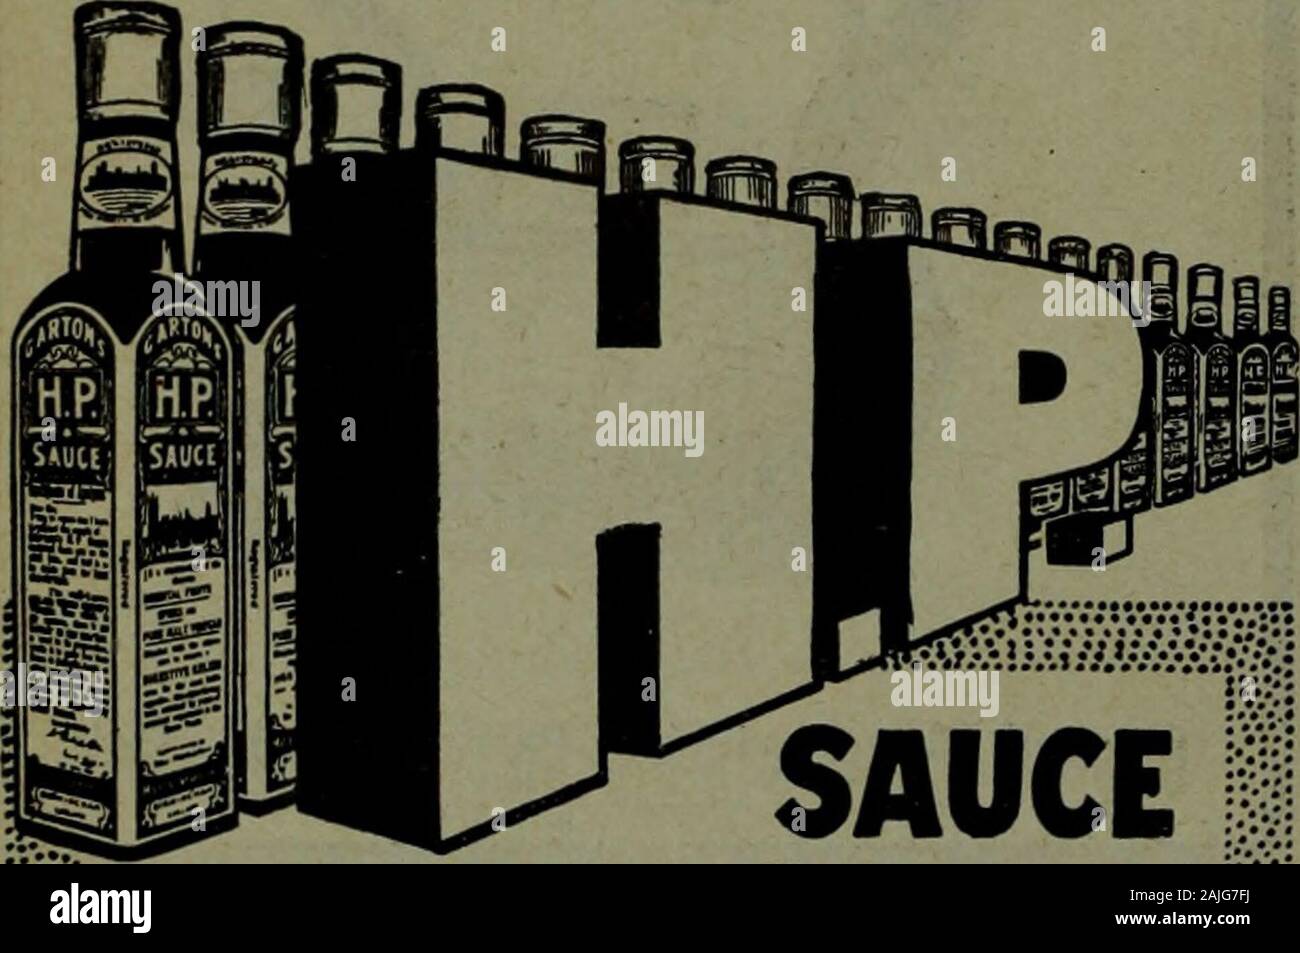 Canadian grocer July-December 1908 . TT^:-yXifij)Milll SAUCE •5W .{{/Siyffis ENGLANDS MOST POPULAR SAUCE H.P.i popularity a* an ideal kitchen Sauce ha* reachedCanada. The live H.P. Canadian Advertiting is creating a de-mand for YOU to tupply. ,. The name H.P. tignifie* House of Parliament and thisfamous condiment is in use on the dining tables of the Houseand enjoyed daily by the members of Parliament. Write for samples and prices. W. 0. Patrick A Oo., Toronto and MontroalR. B. Saoton & Co., Halifax, N.8.Qaorgeaon Co., Ltd., Calgrary, AlbertaKelly, Dougriaa Jk Co., Ltd., Vanoouvar, B.O.Eilla Stock Photo